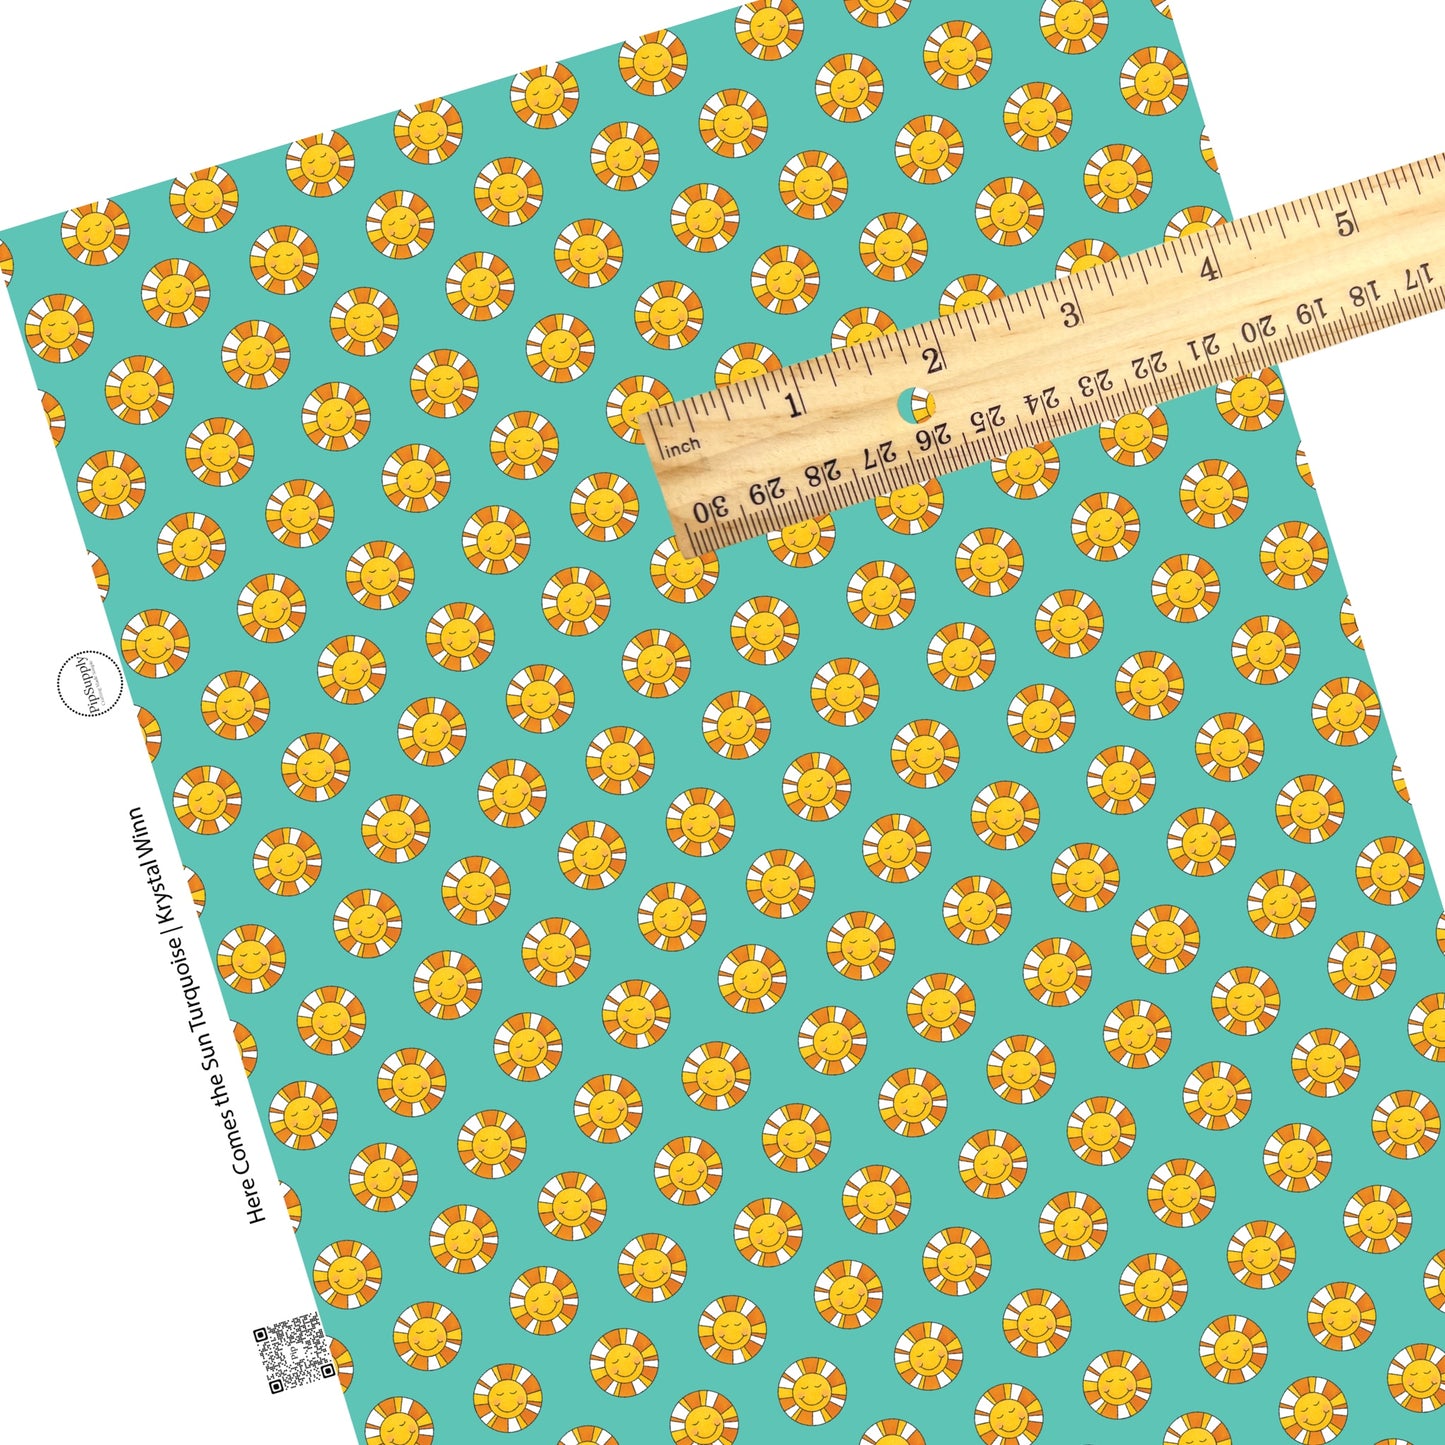 Smiley face multi sunshines on turquoise faux leather sheets